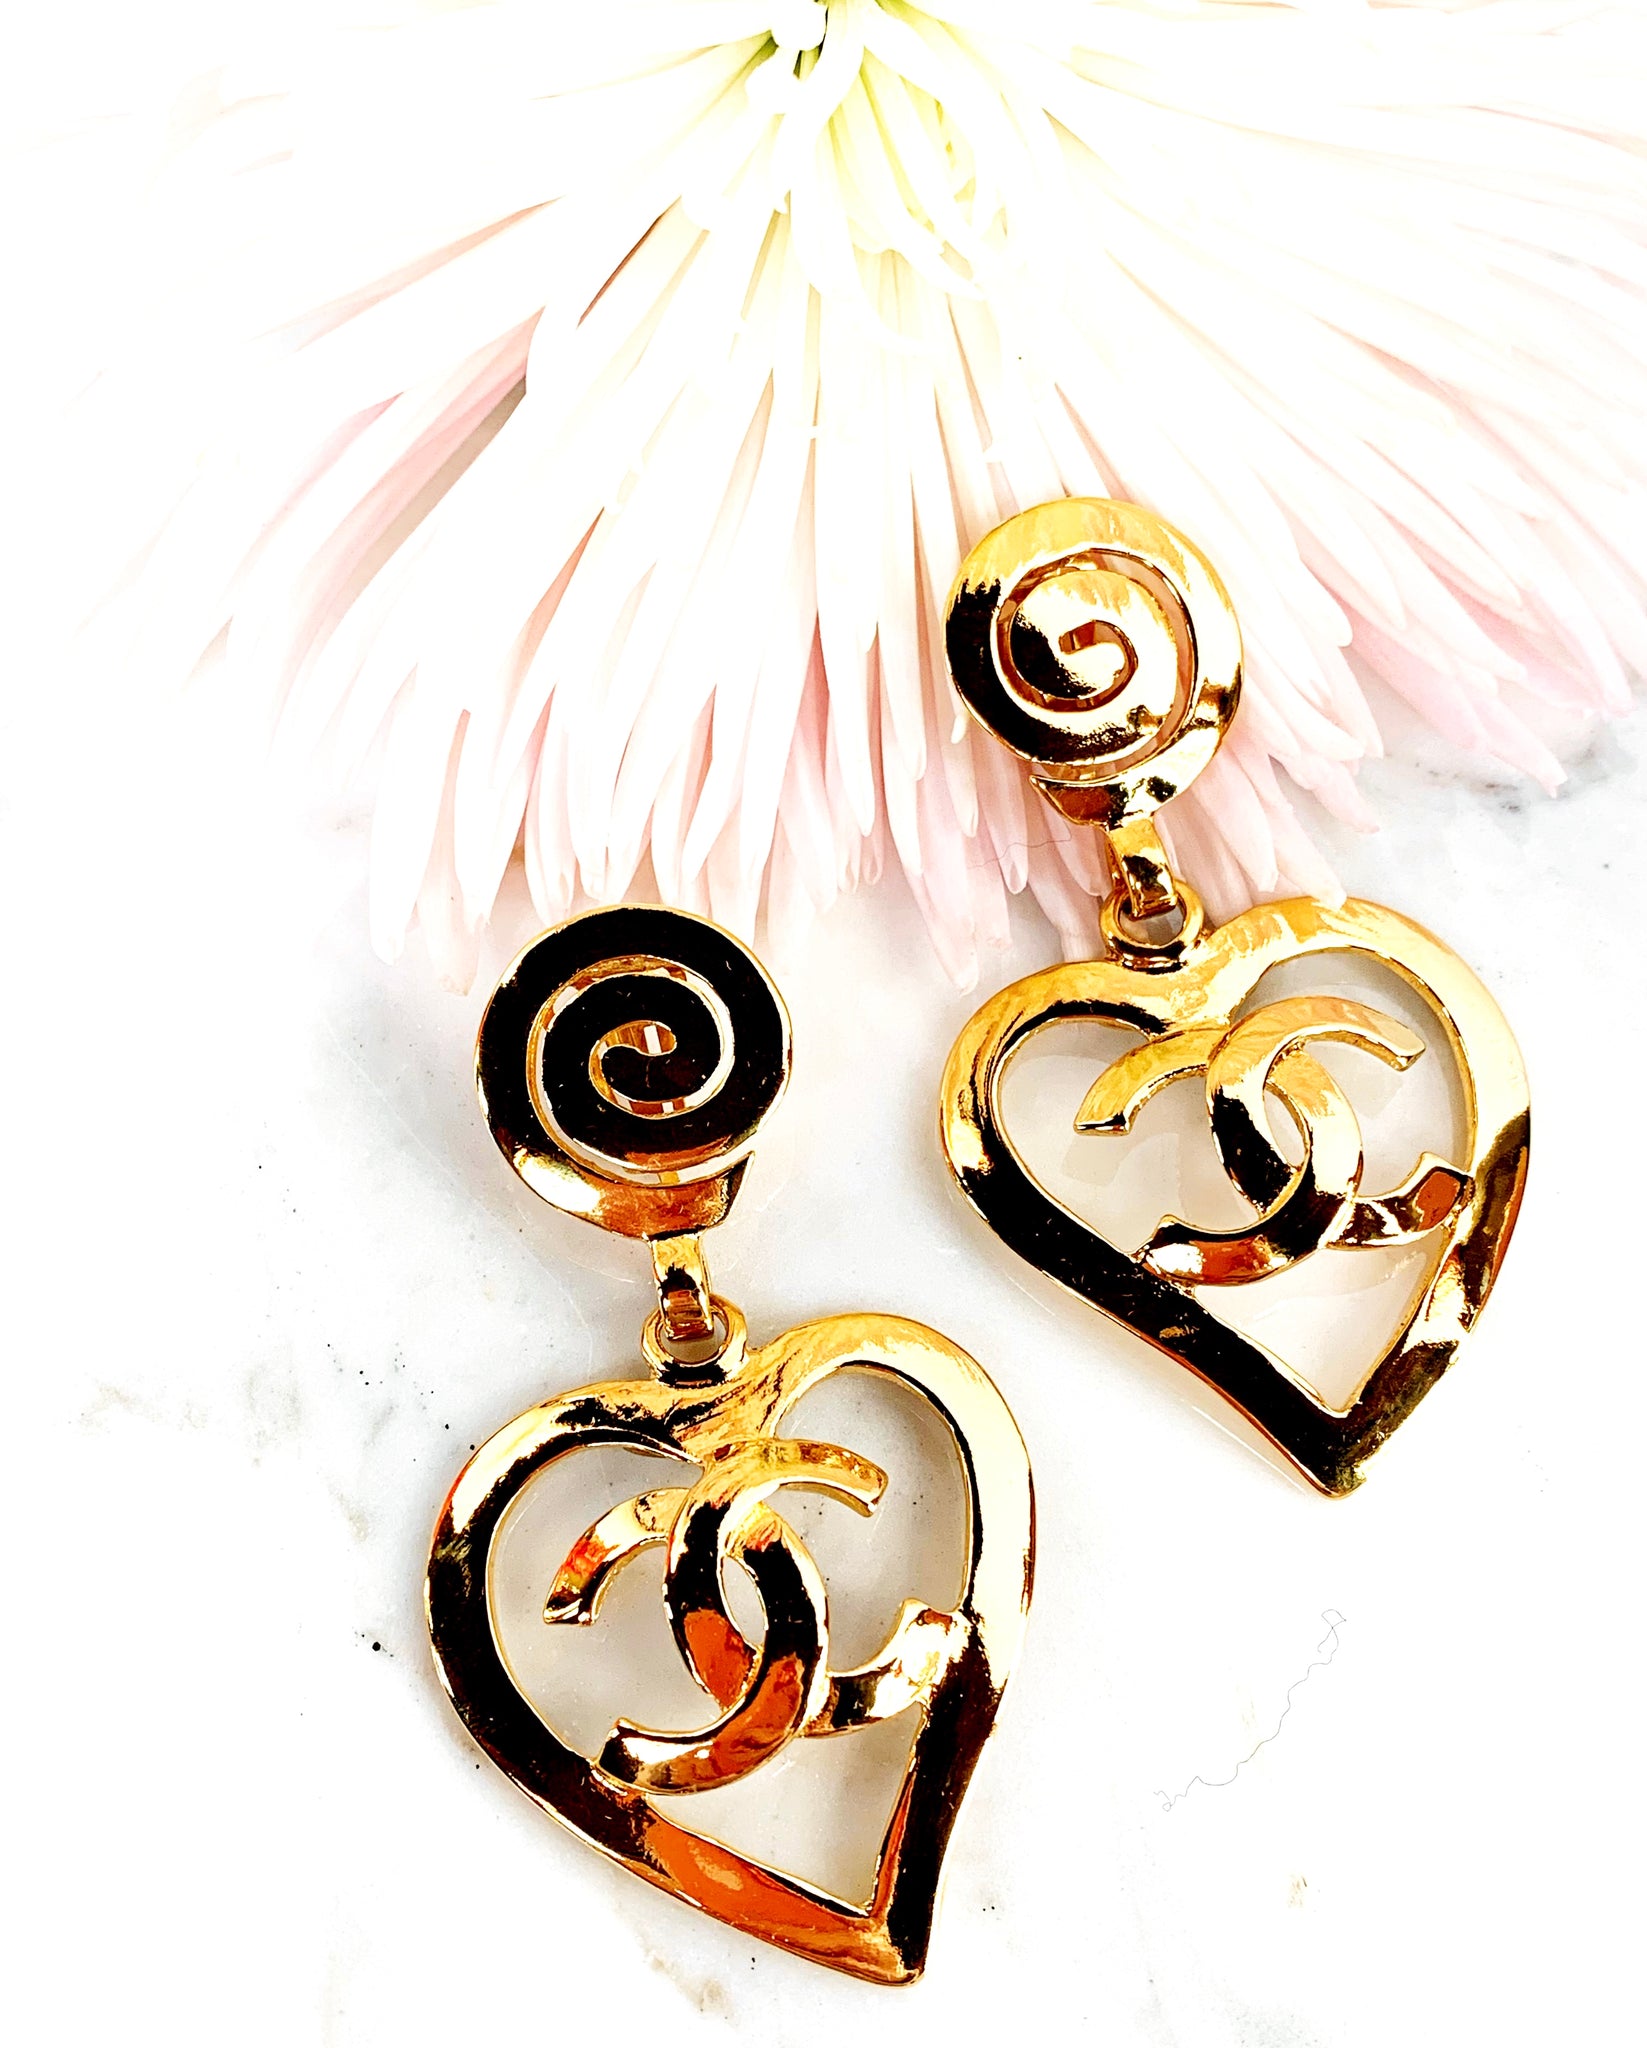 CHANEL BARBIE COLLECTION HEART EARRINGS 1995 – The Paris Mademoiselle